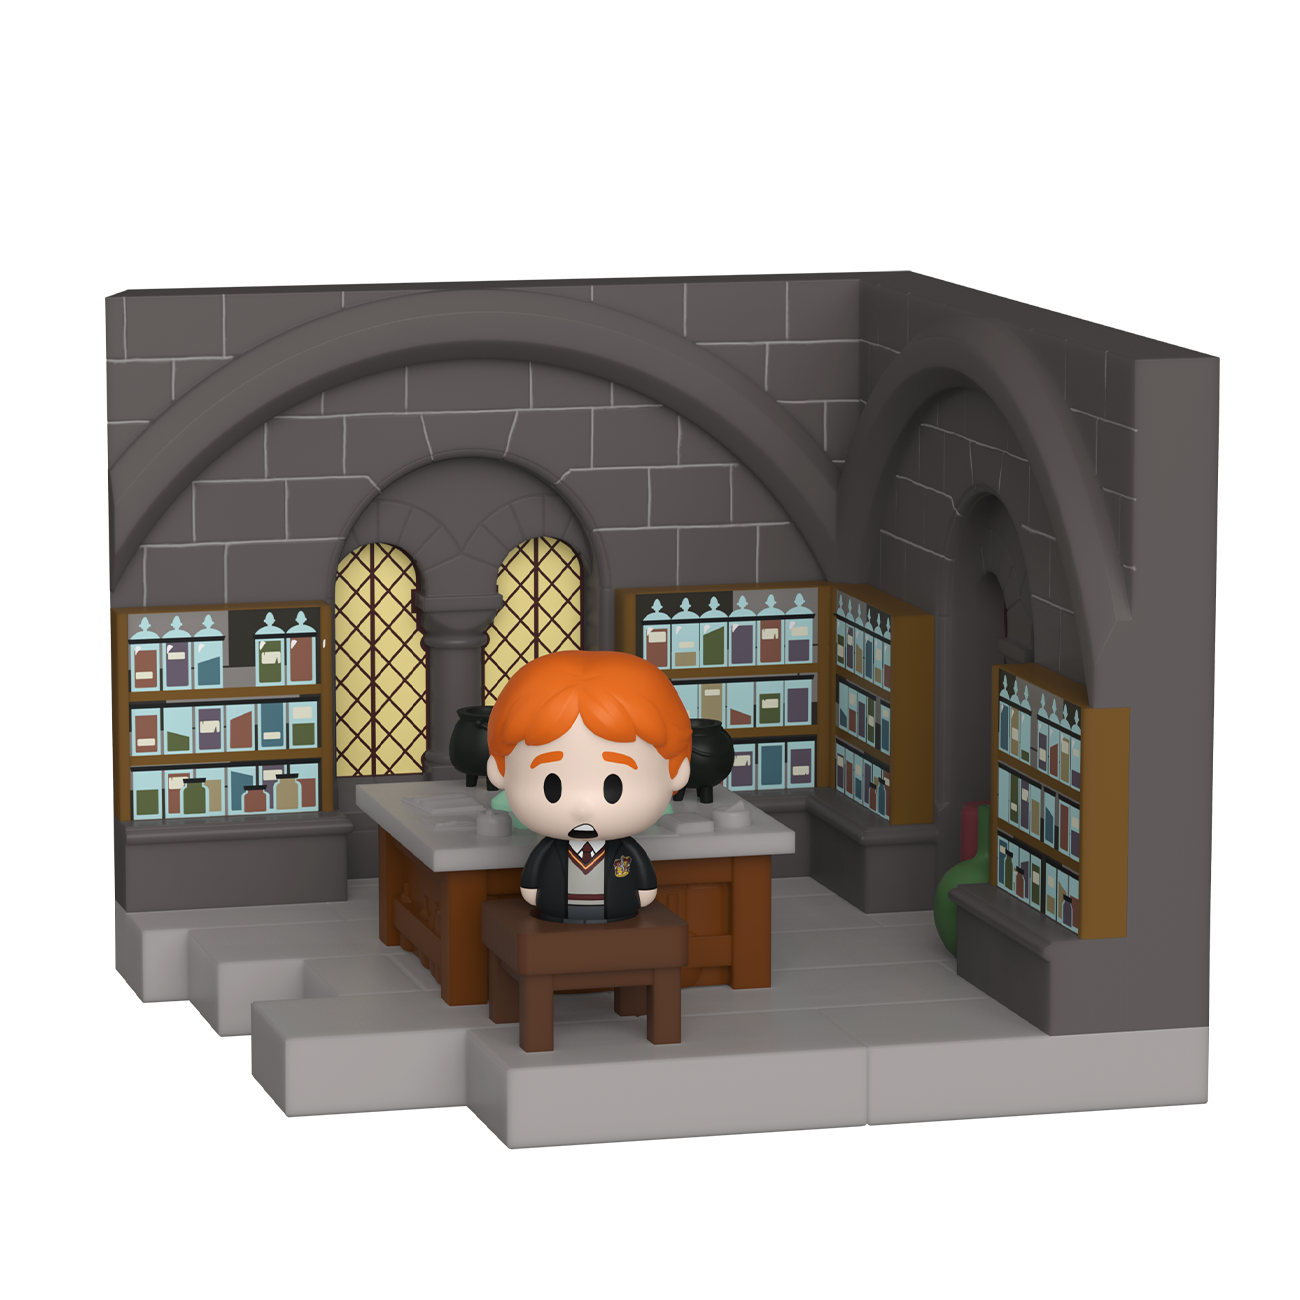 Photos - Action Figures / Transformers Funko POP! MINI MOMENT Ron Weasley - Harry Potter Potions Class 